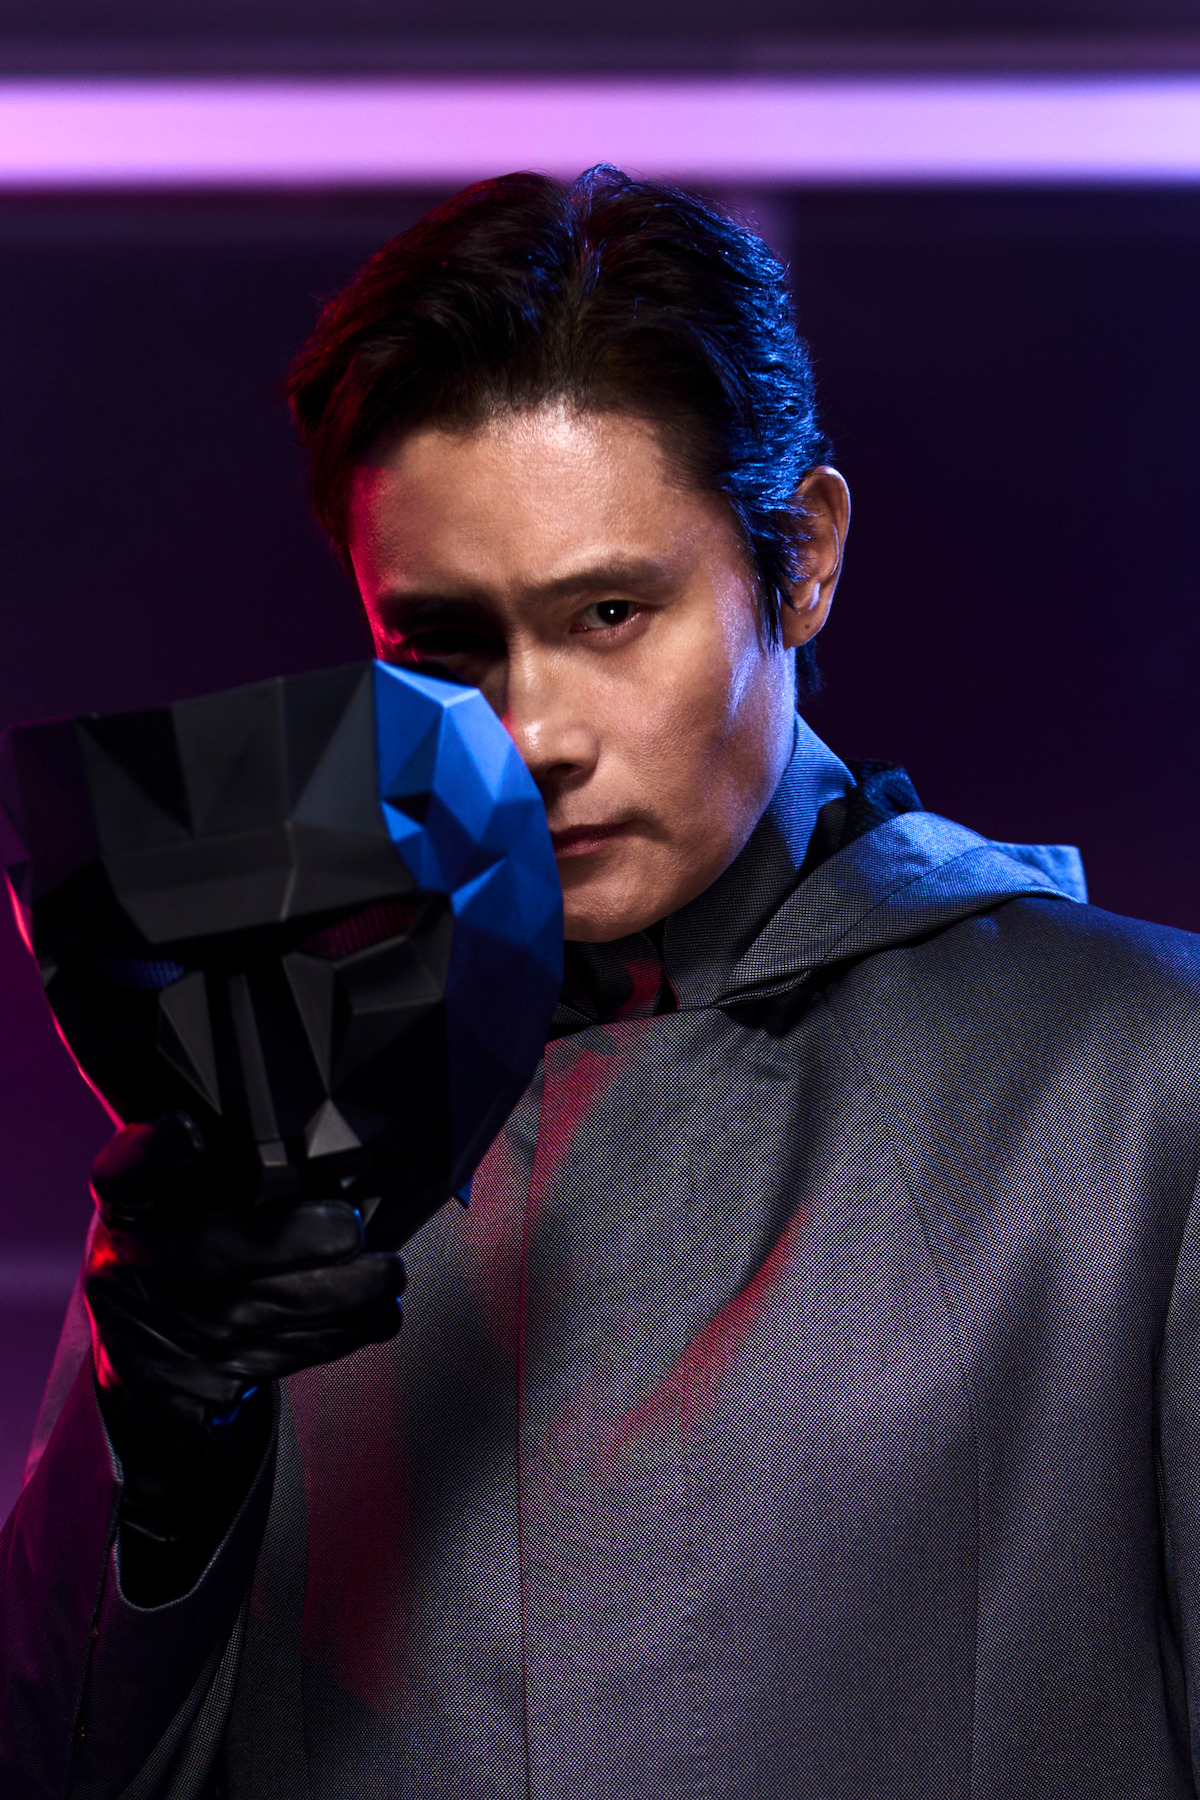 Lee Byung-hun as Front Man in a gray coat and black gloves moves aside a black mask to revel his face in season 2 of ‘Squid Game’